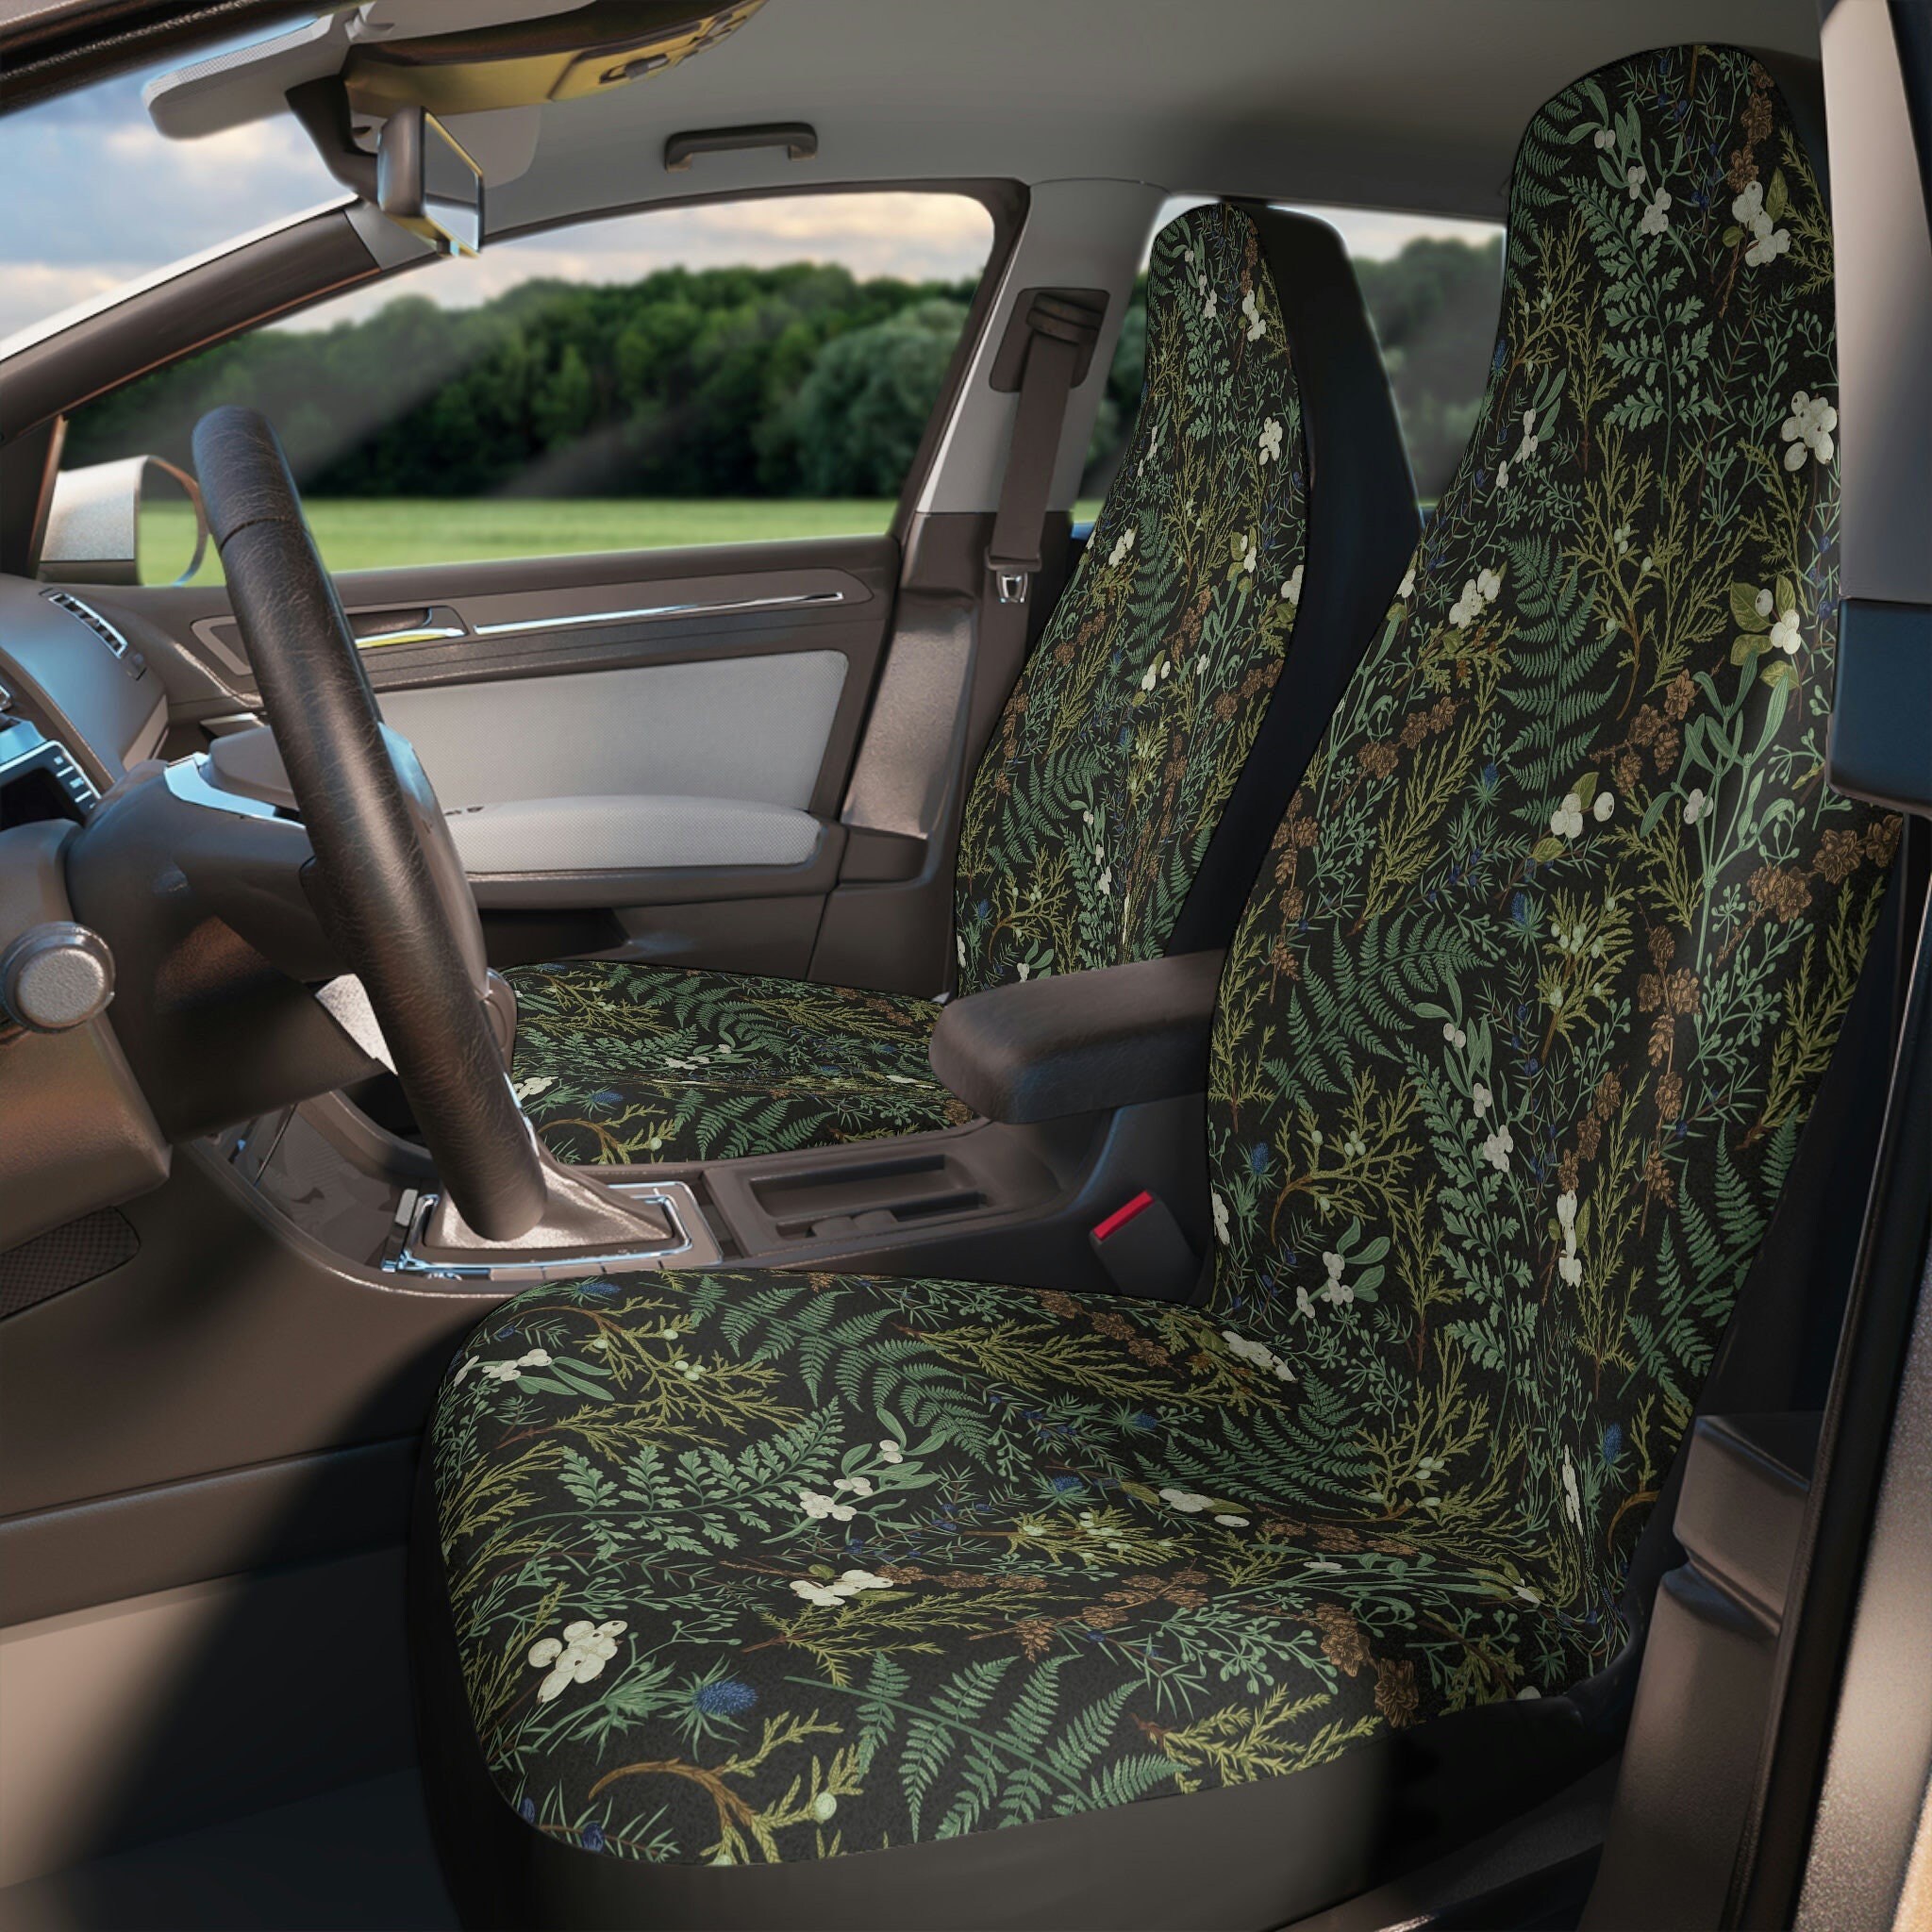 Discover Forest Car Seat Covers - Dark Vintage Botanical Winter Leaves Enchanted Forest Car Seat Covers